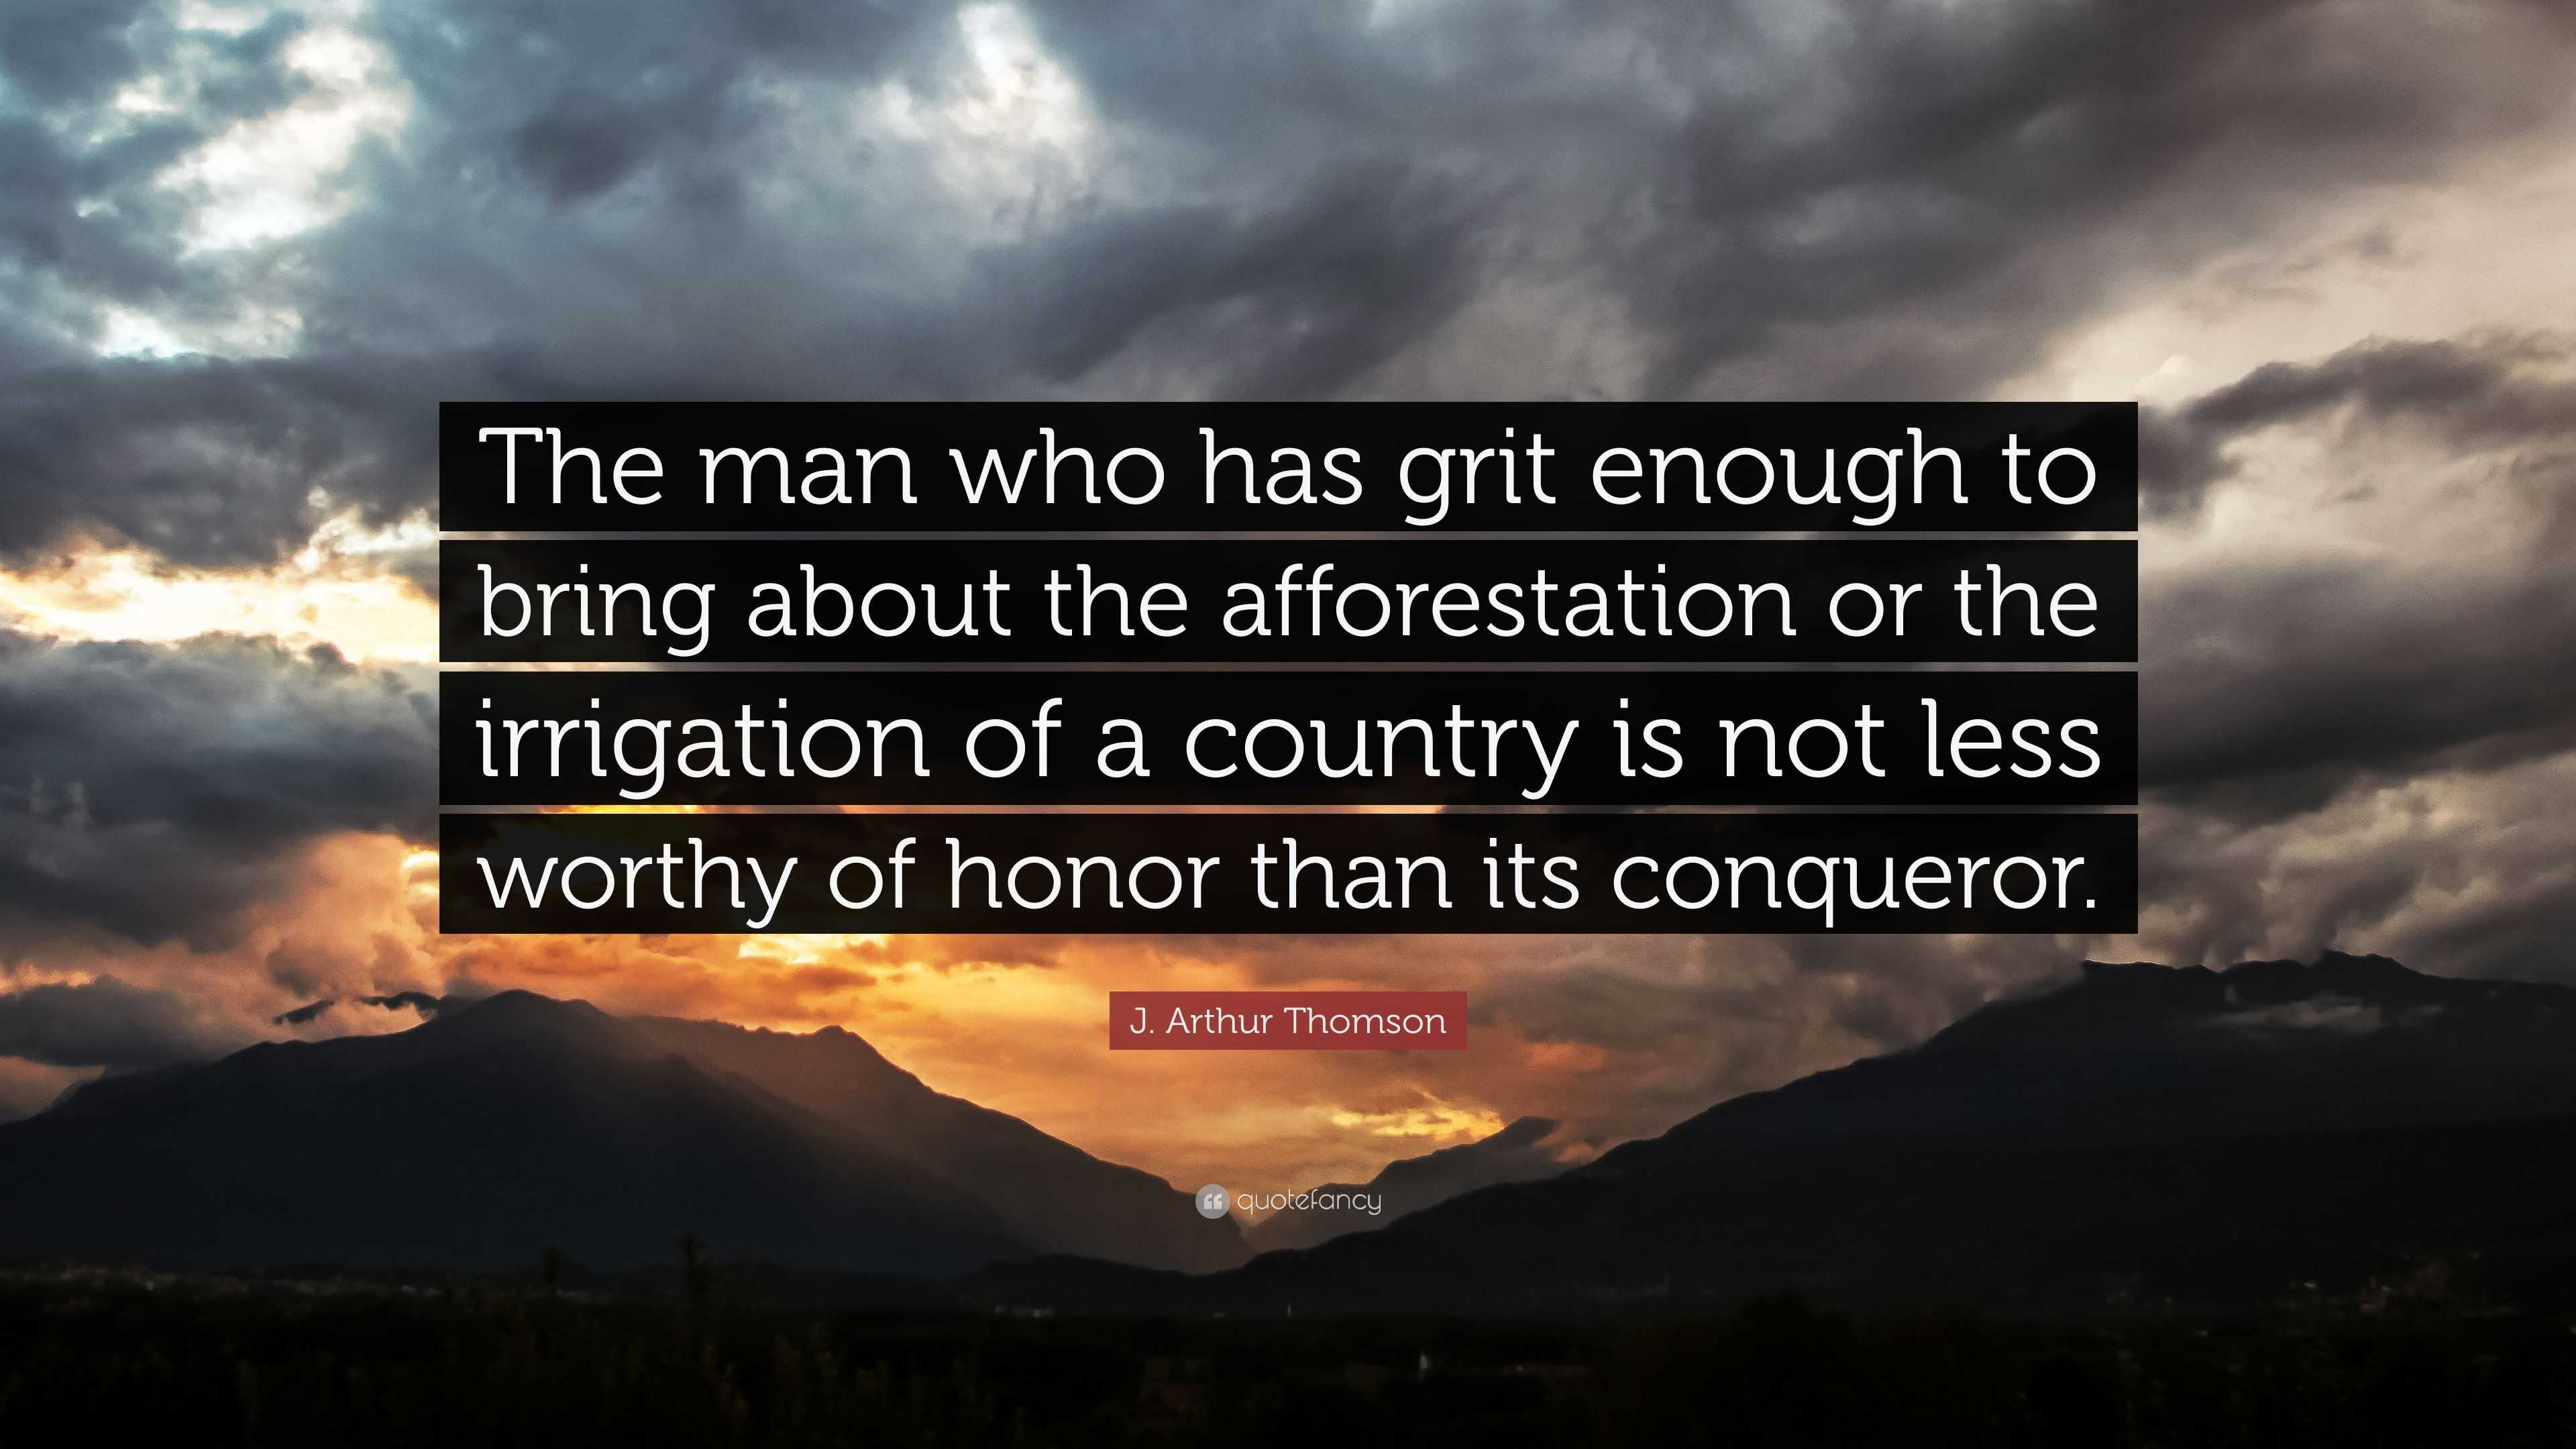 J. Arthur Thomson Quote: “The man who has grit enough to bring about